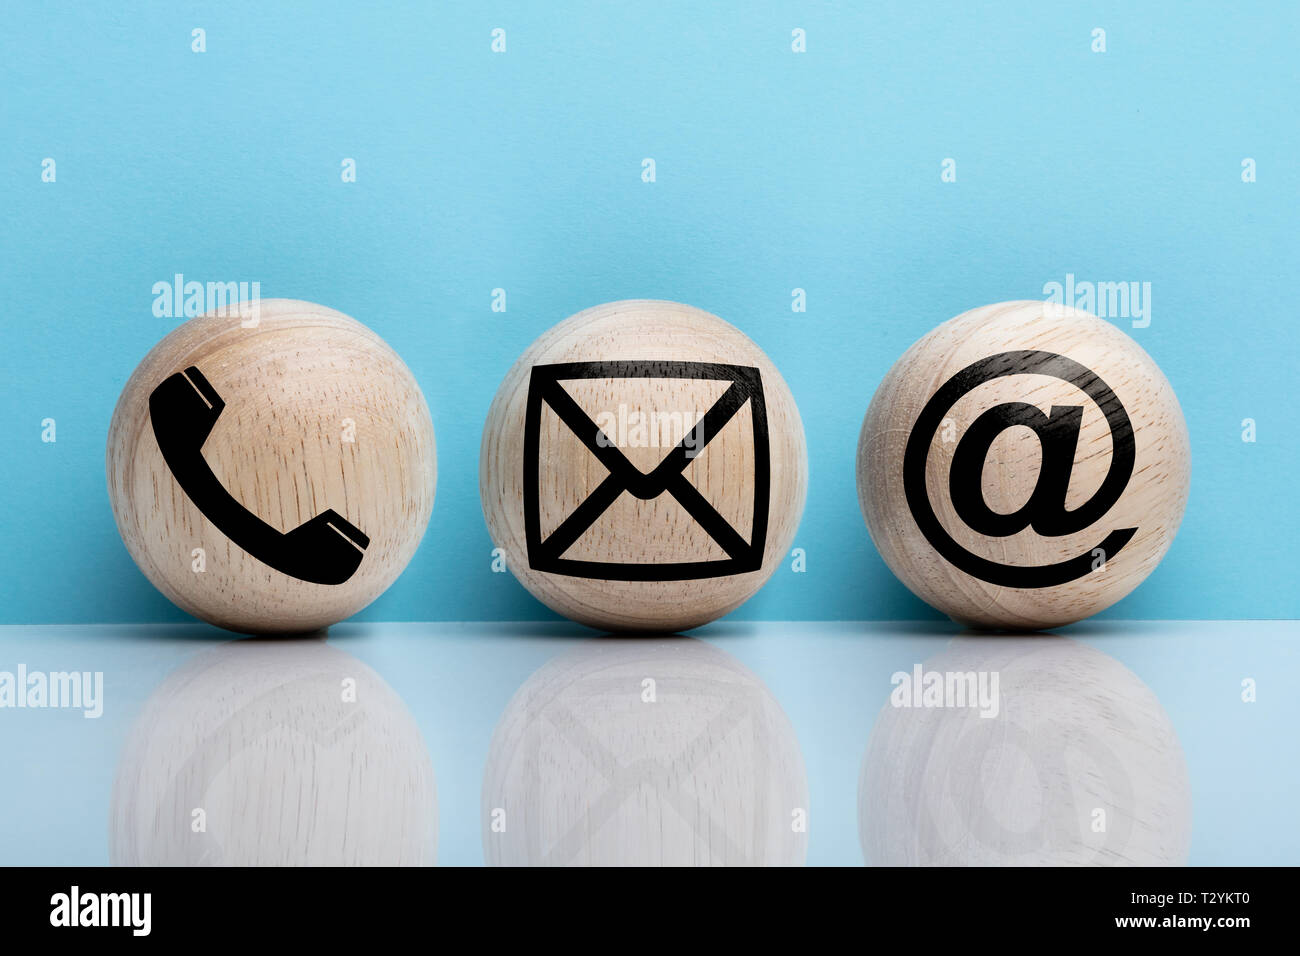 Three Wooden Ball With Contact Icon Arranging In A Row Over Reflecting Floor Stock Photo